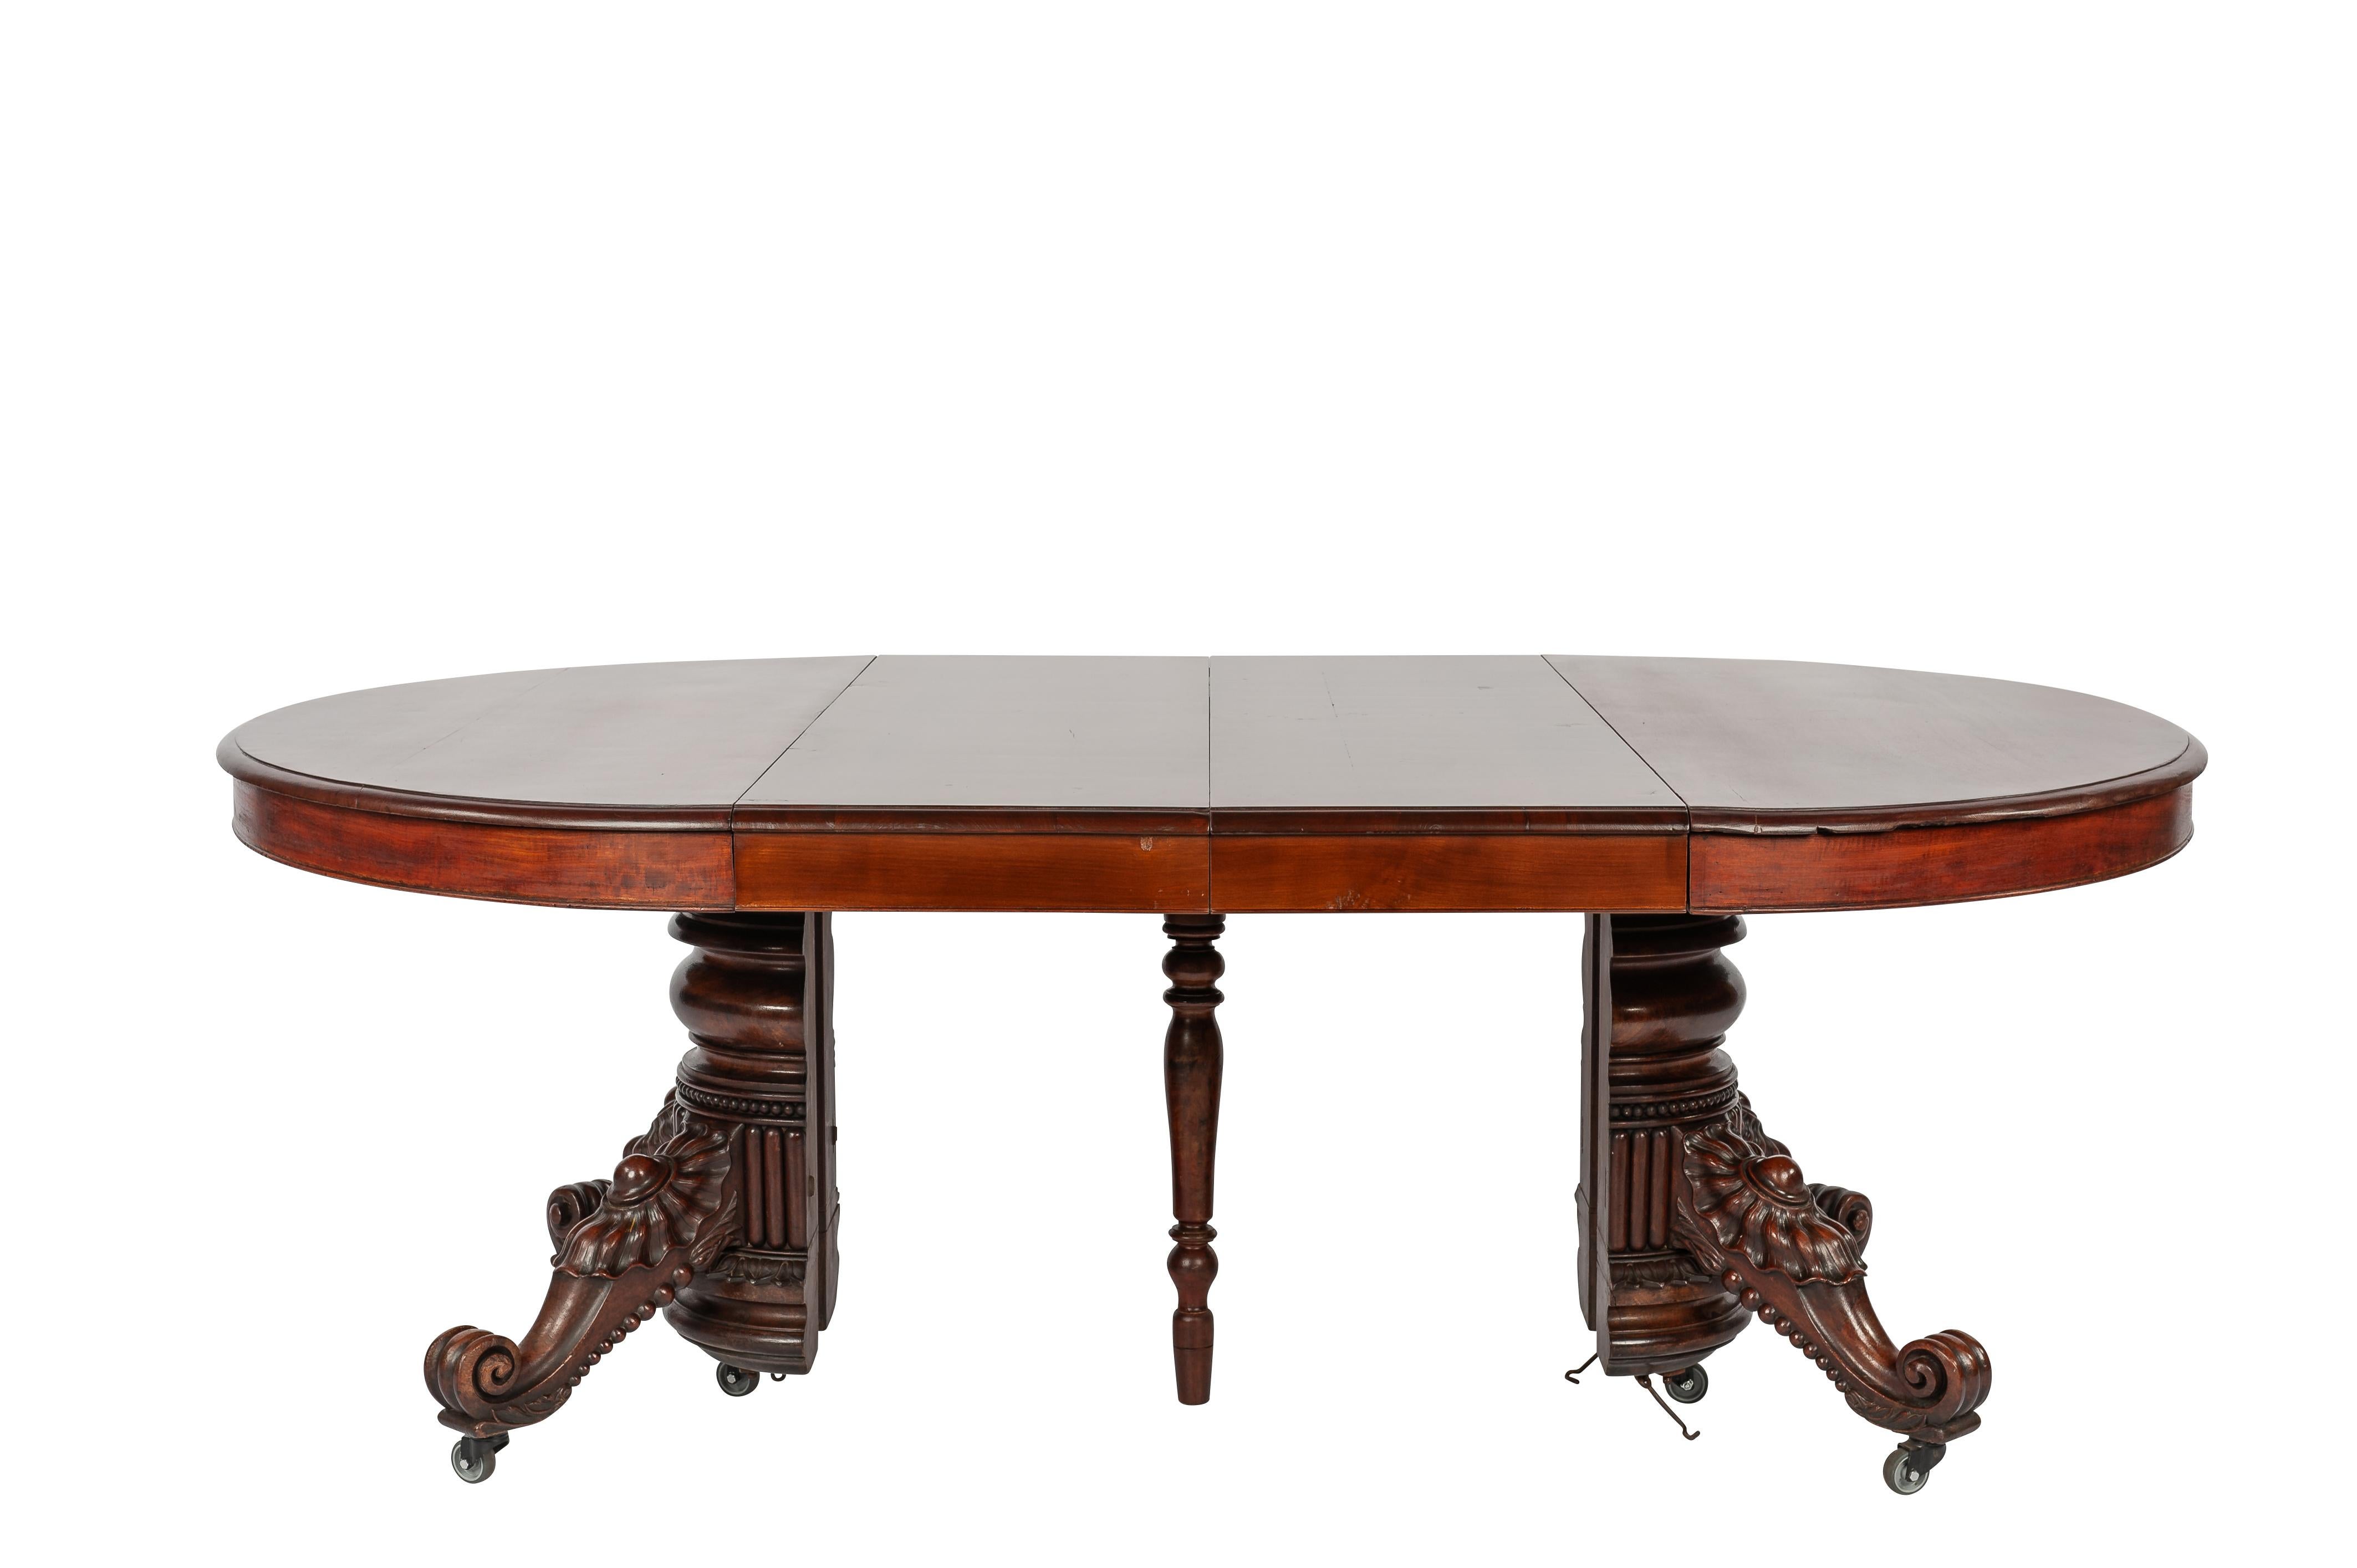 On offer here is an exquisite oval extendible antique dining table, meticulously crafted in central France around 1880. This extraordinary piece boasts a central pedestal, intricately carved to perfection. Through a cleverly engineered solid oak